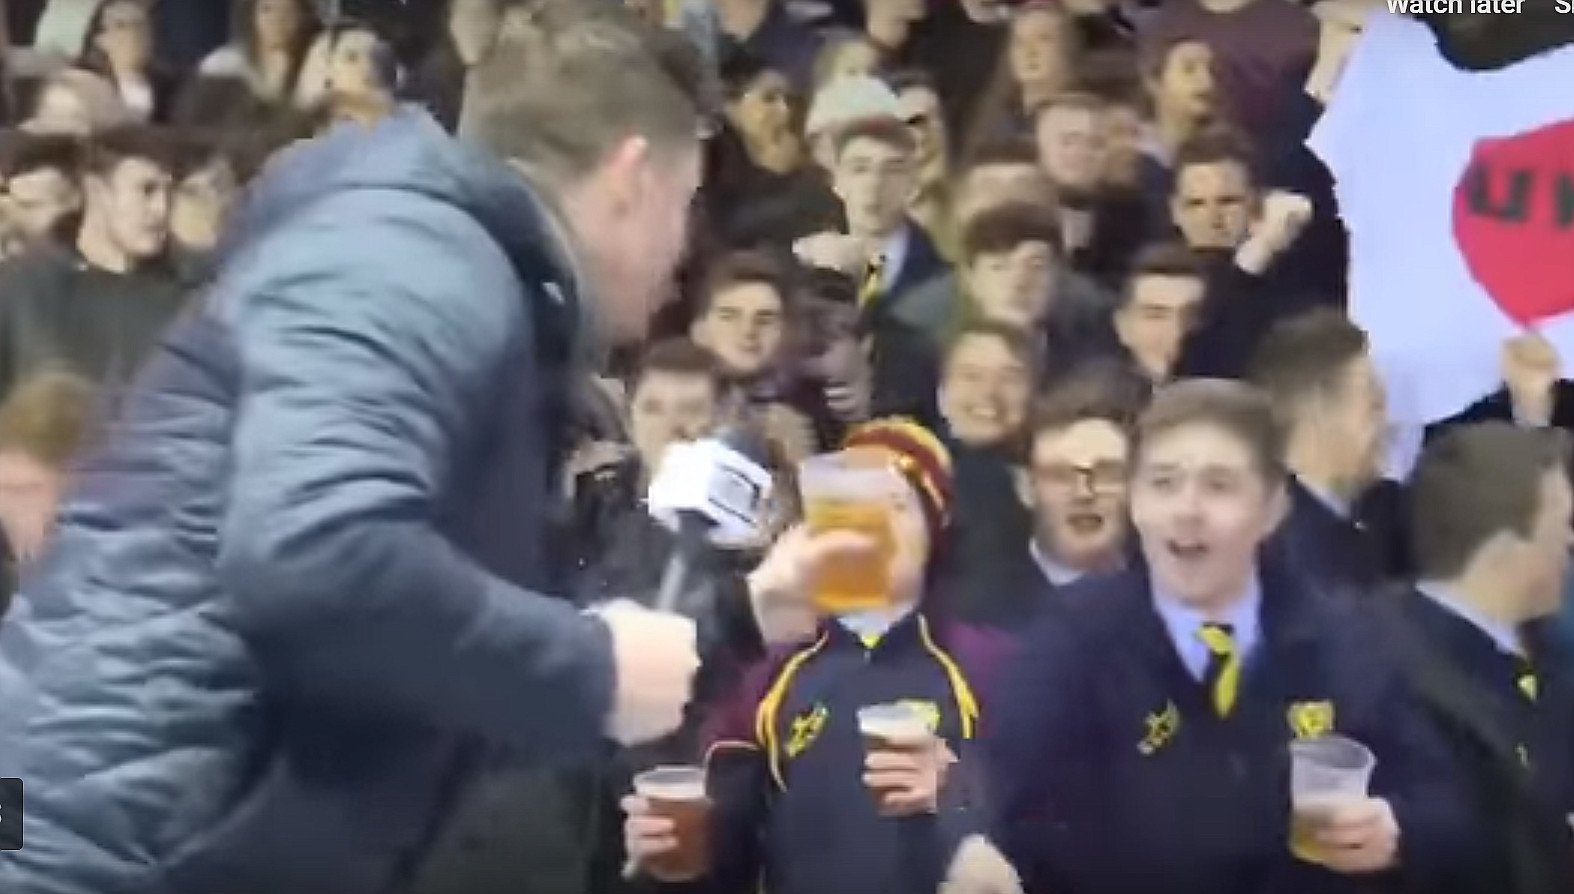 WATCH: A TV presenter is challenged by a rugby crowd, what he does next is broadcasting history